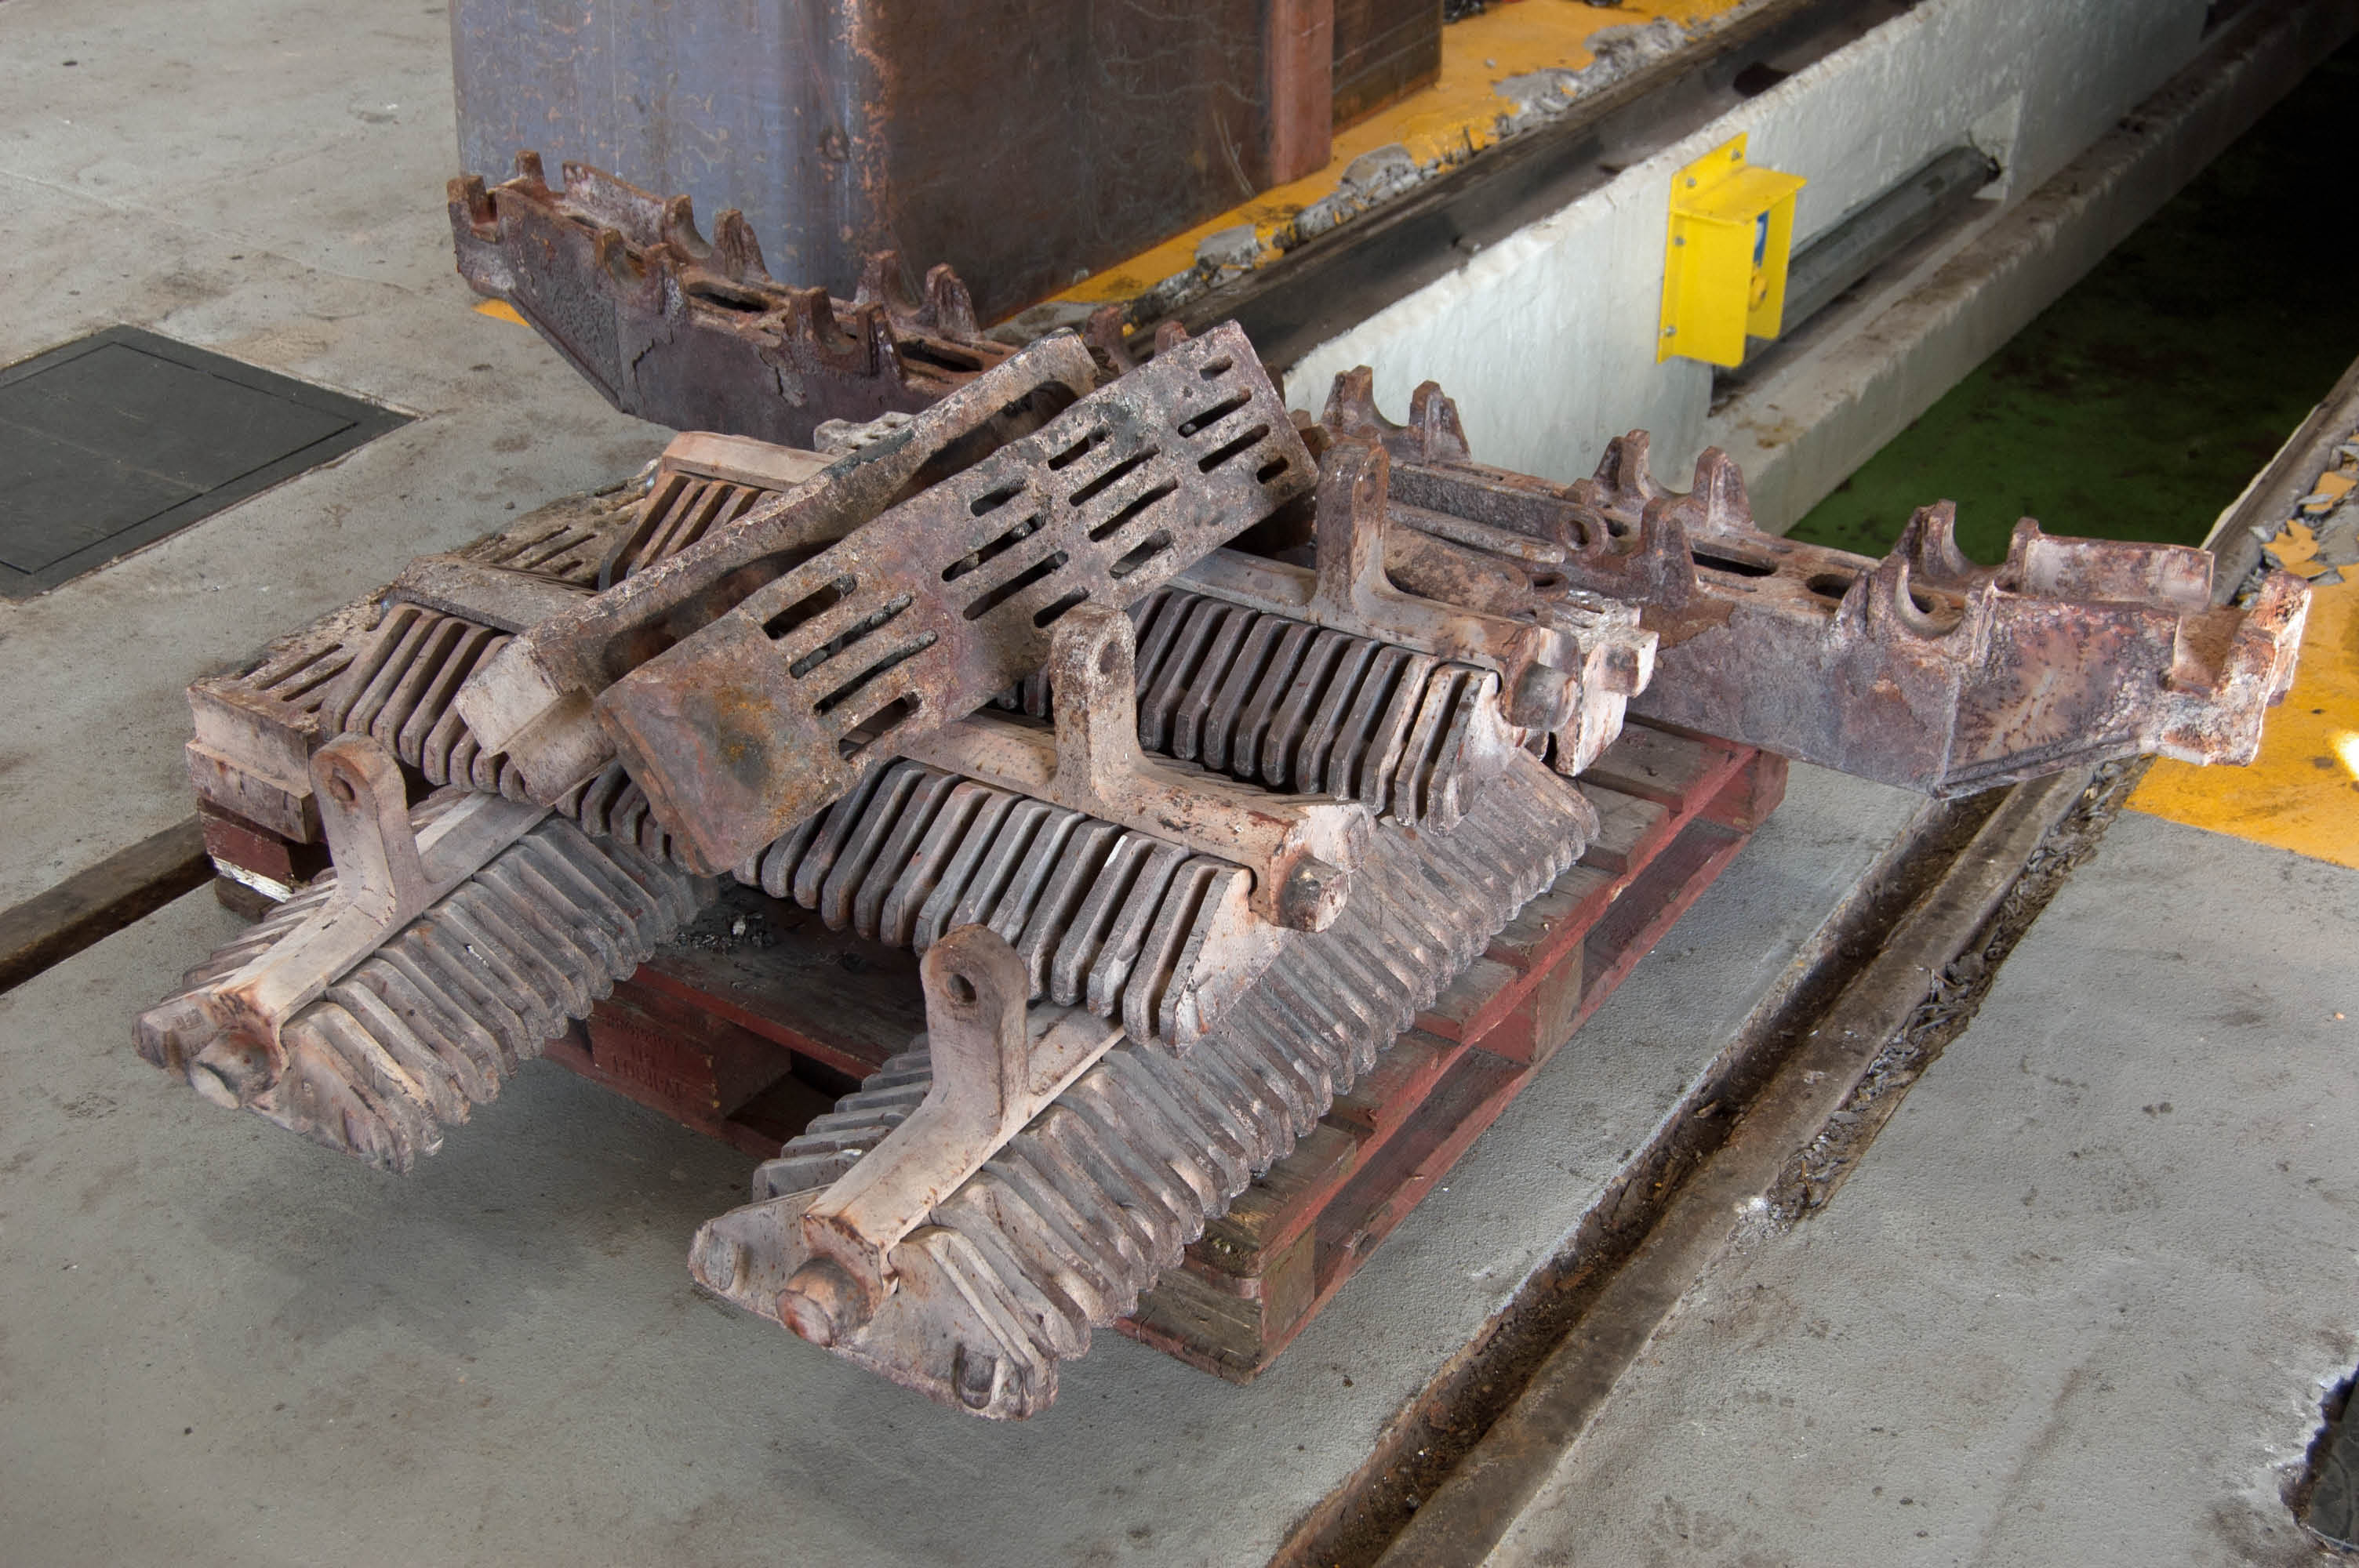 The various parts of the dismantled grate